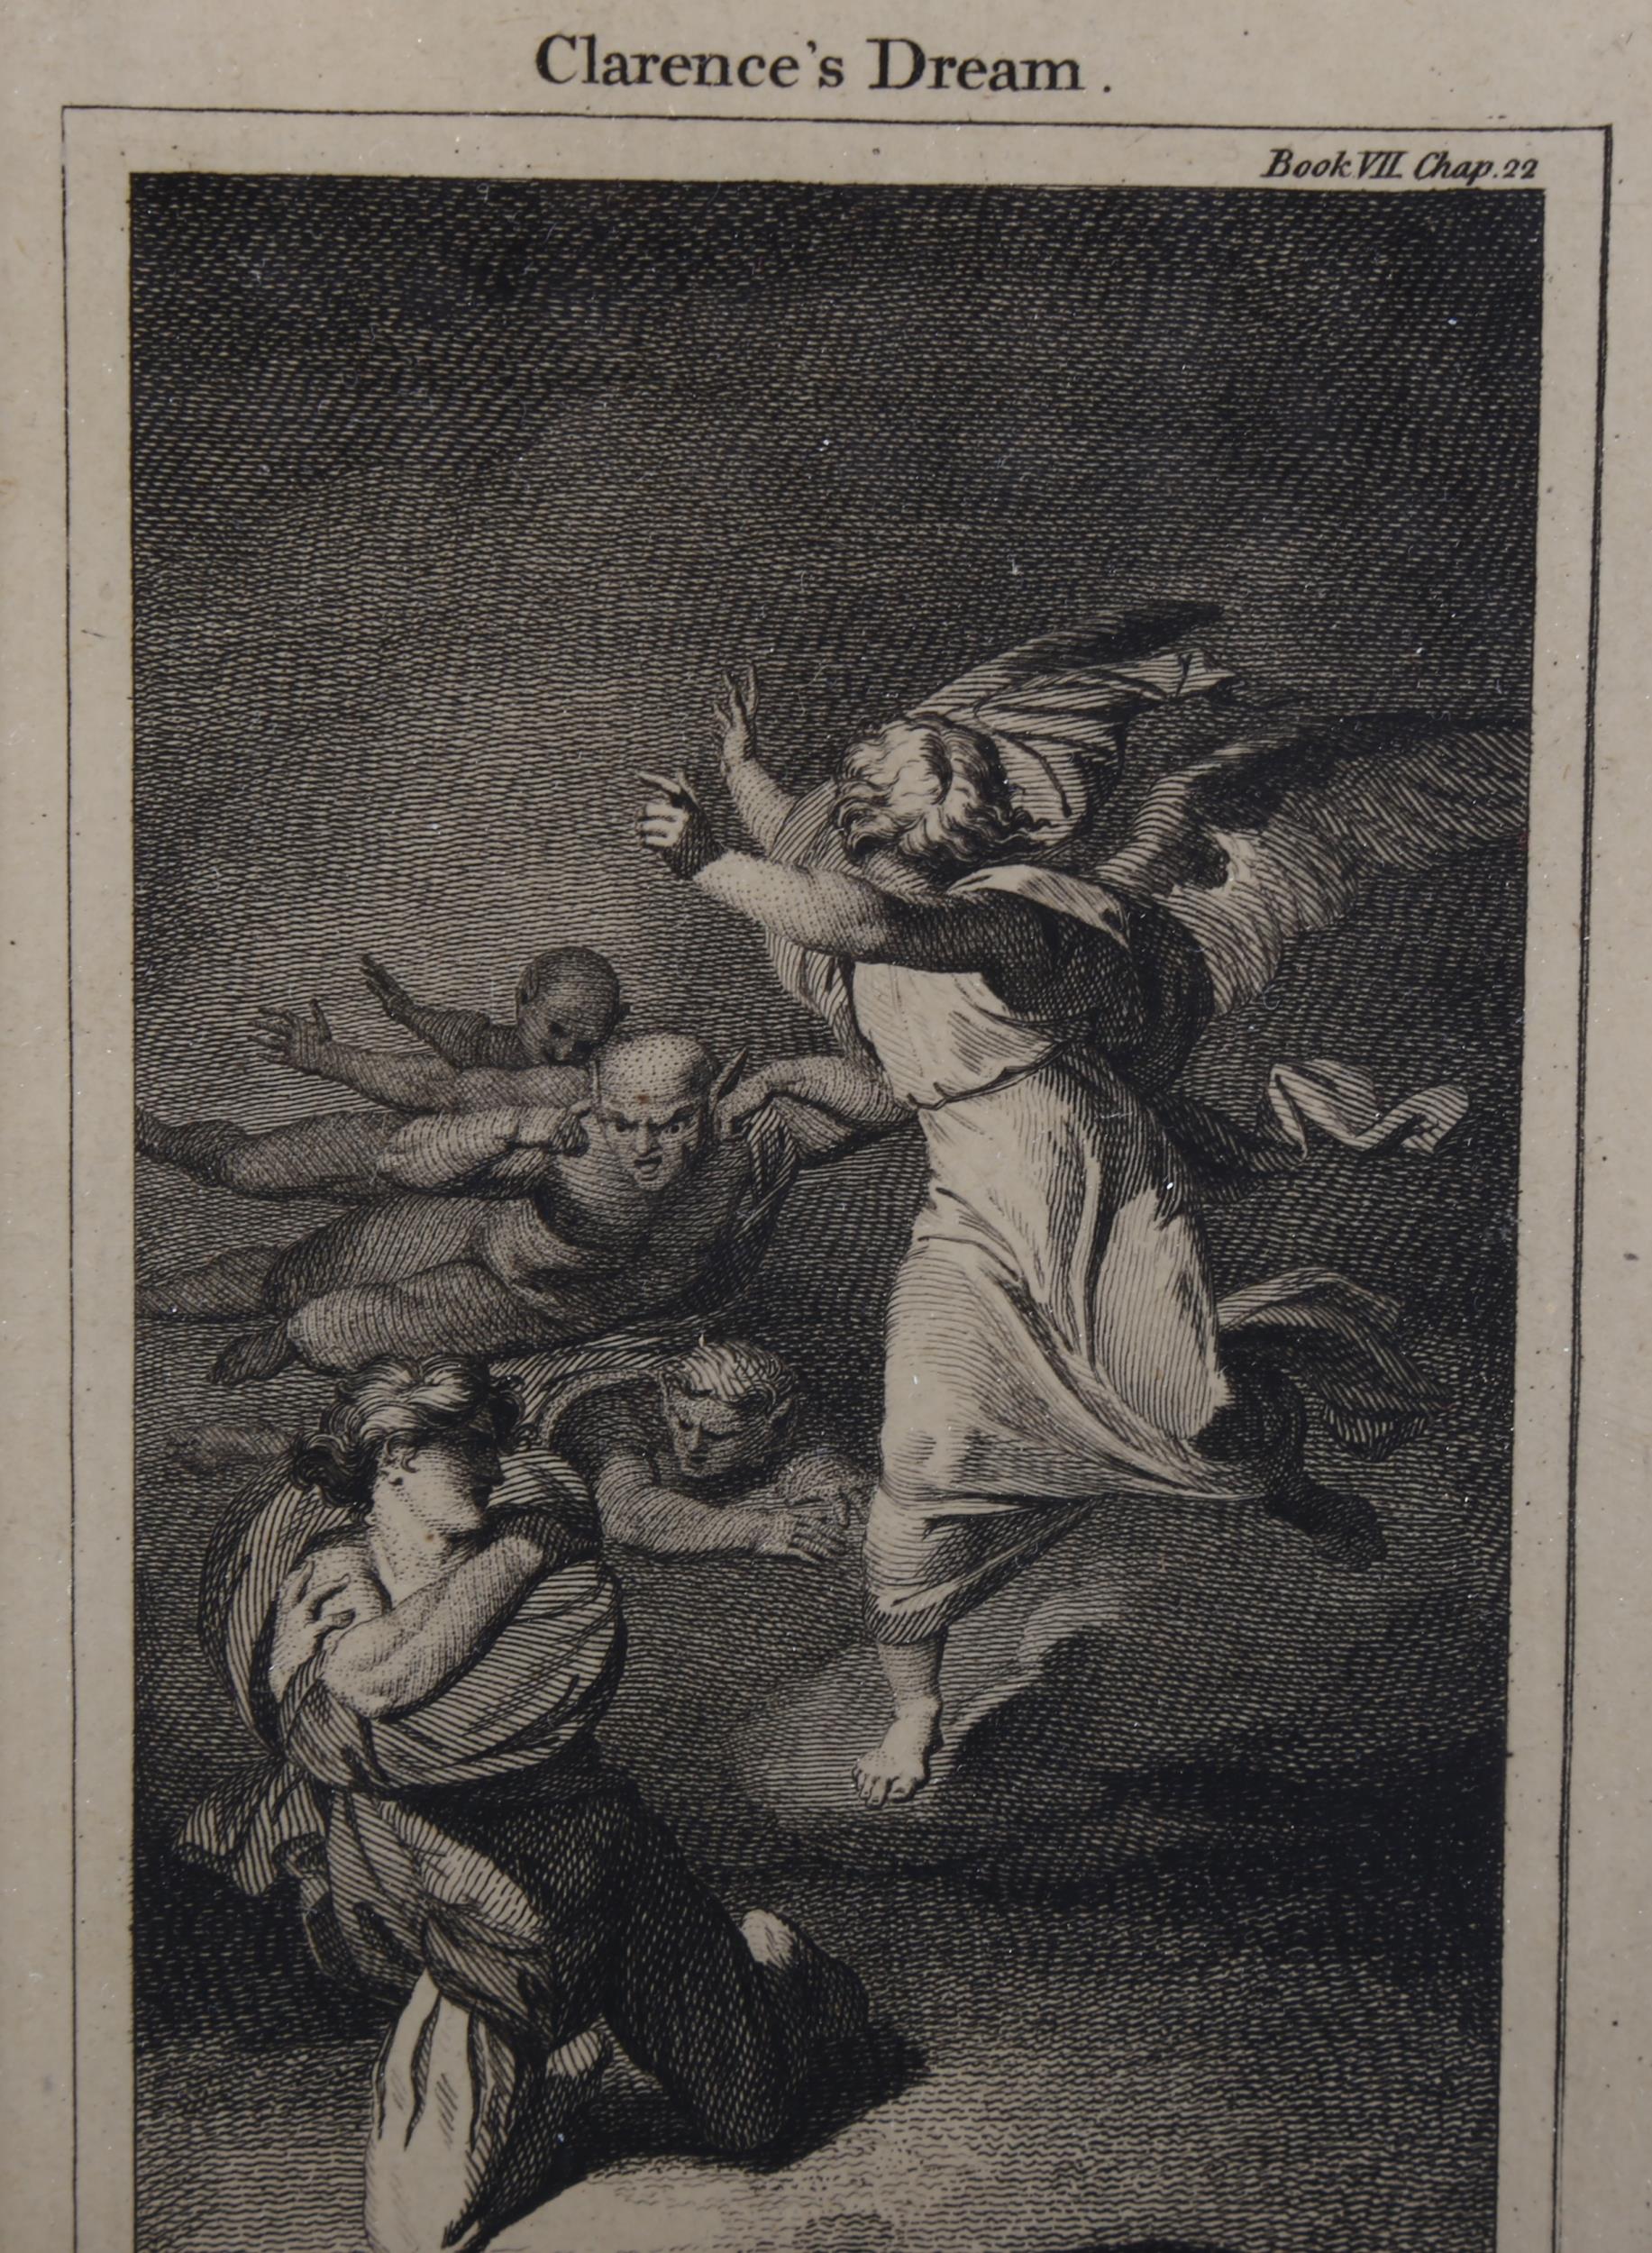 William Blake, Clarence's Dream, engraving, after Stodhard 1780, image 12cm x 7cm, framed Even paper - Image 3 of 4